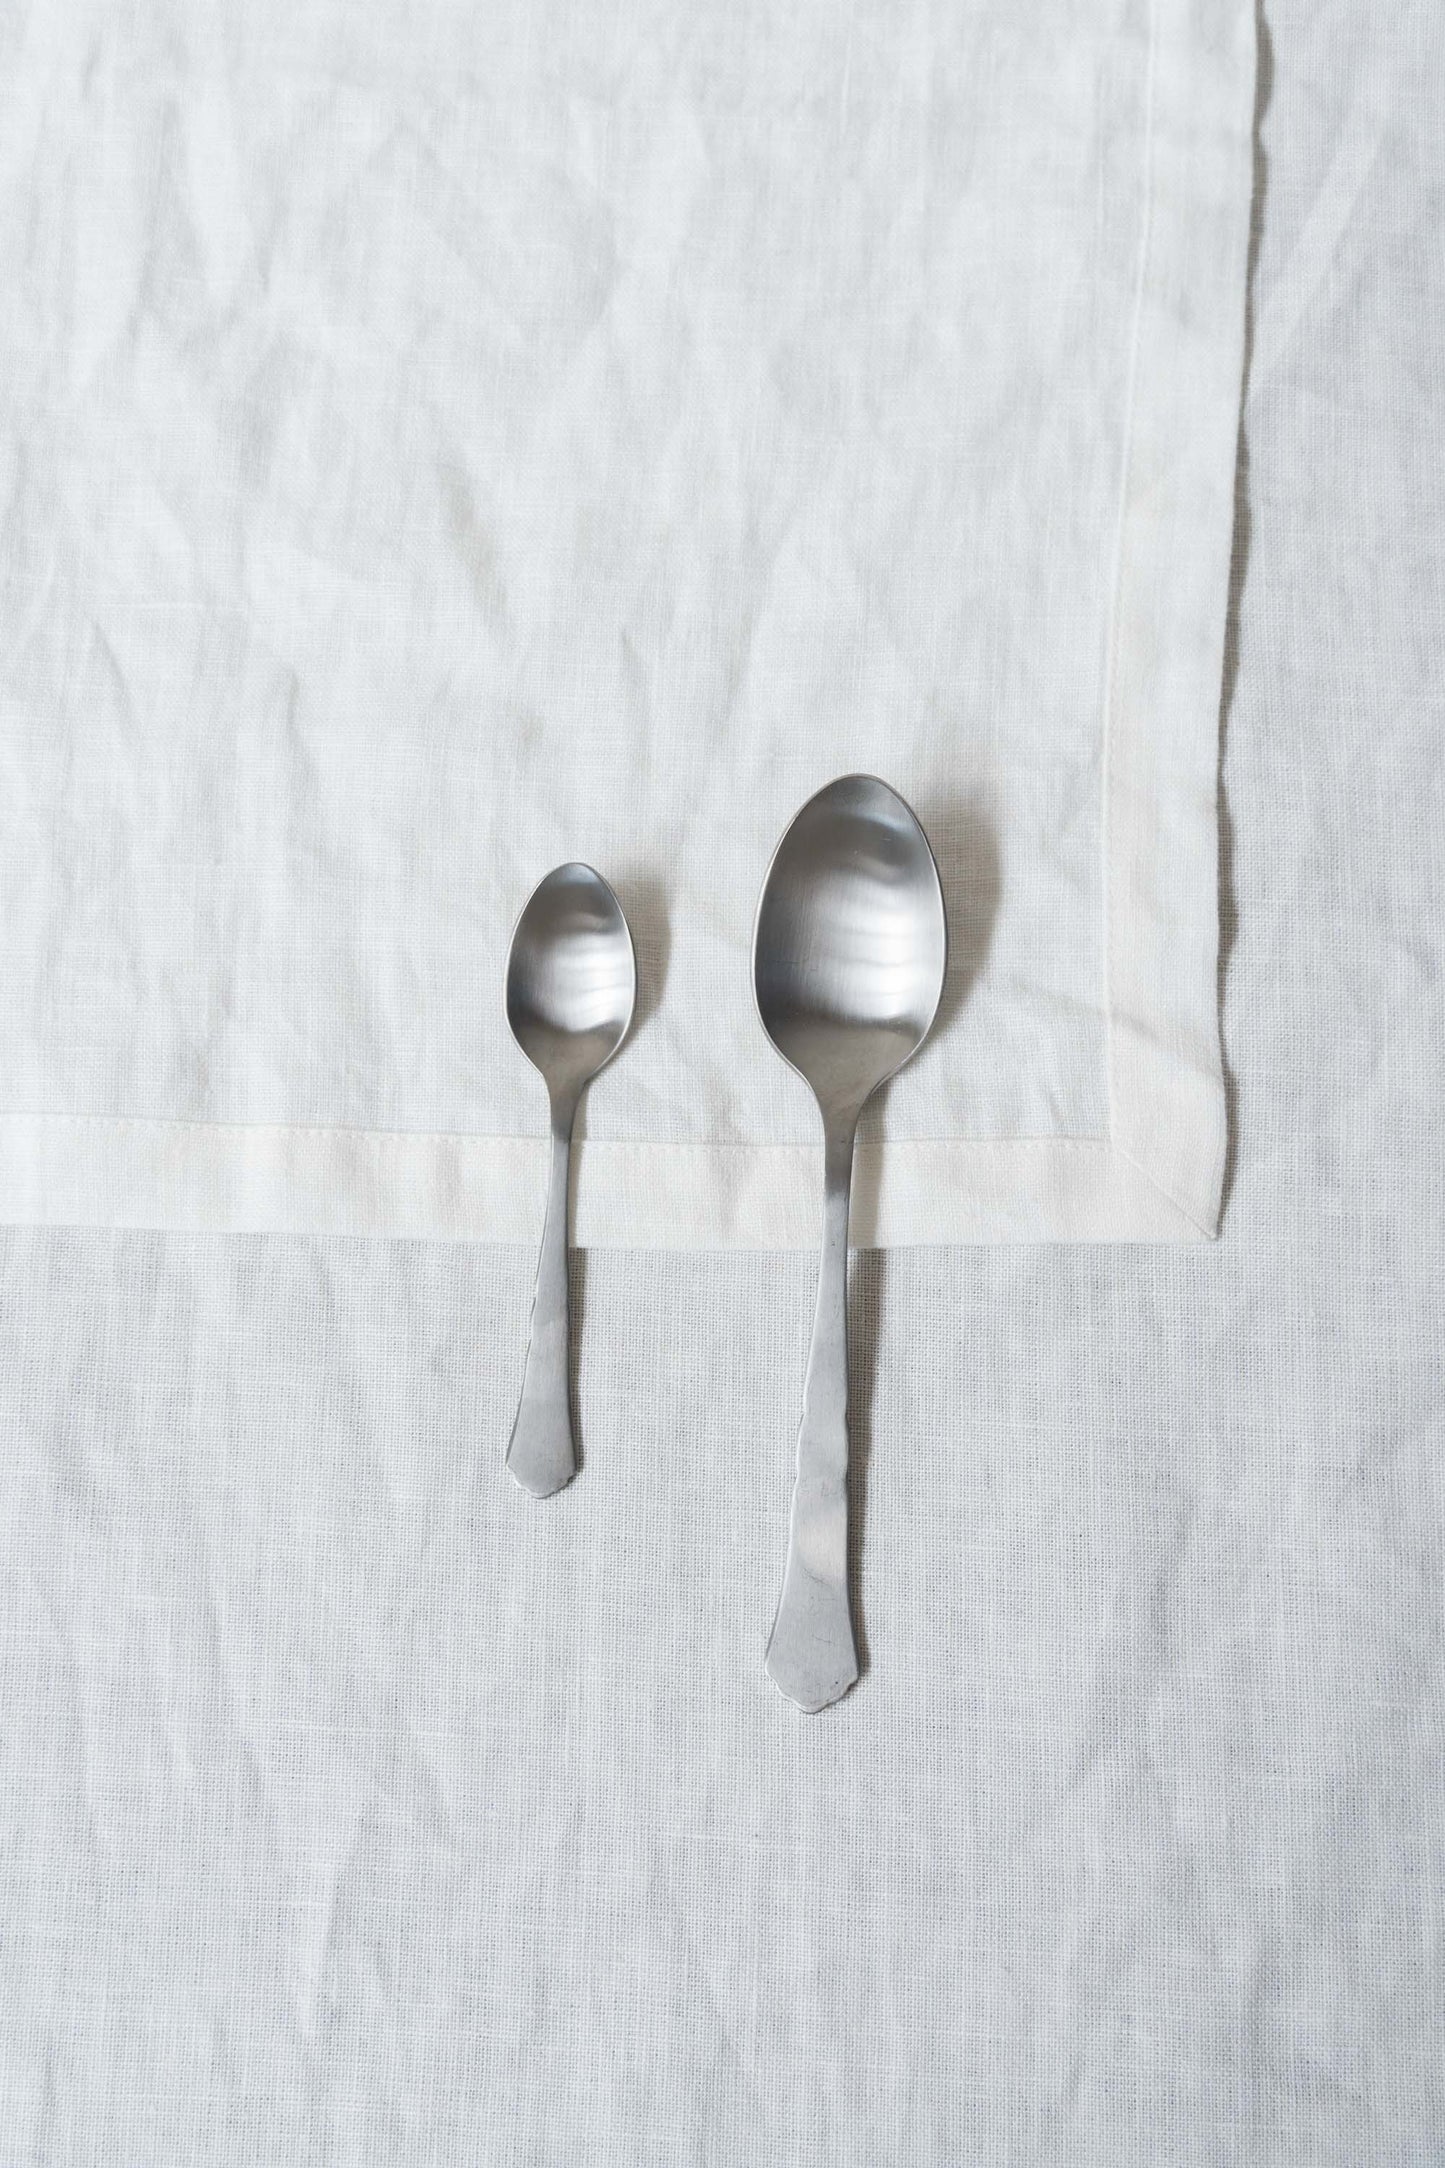 '700 Fruit Spoon - part of the '700 edition KnIndustrie Cutlery collection. Perfect for starters or dessert.